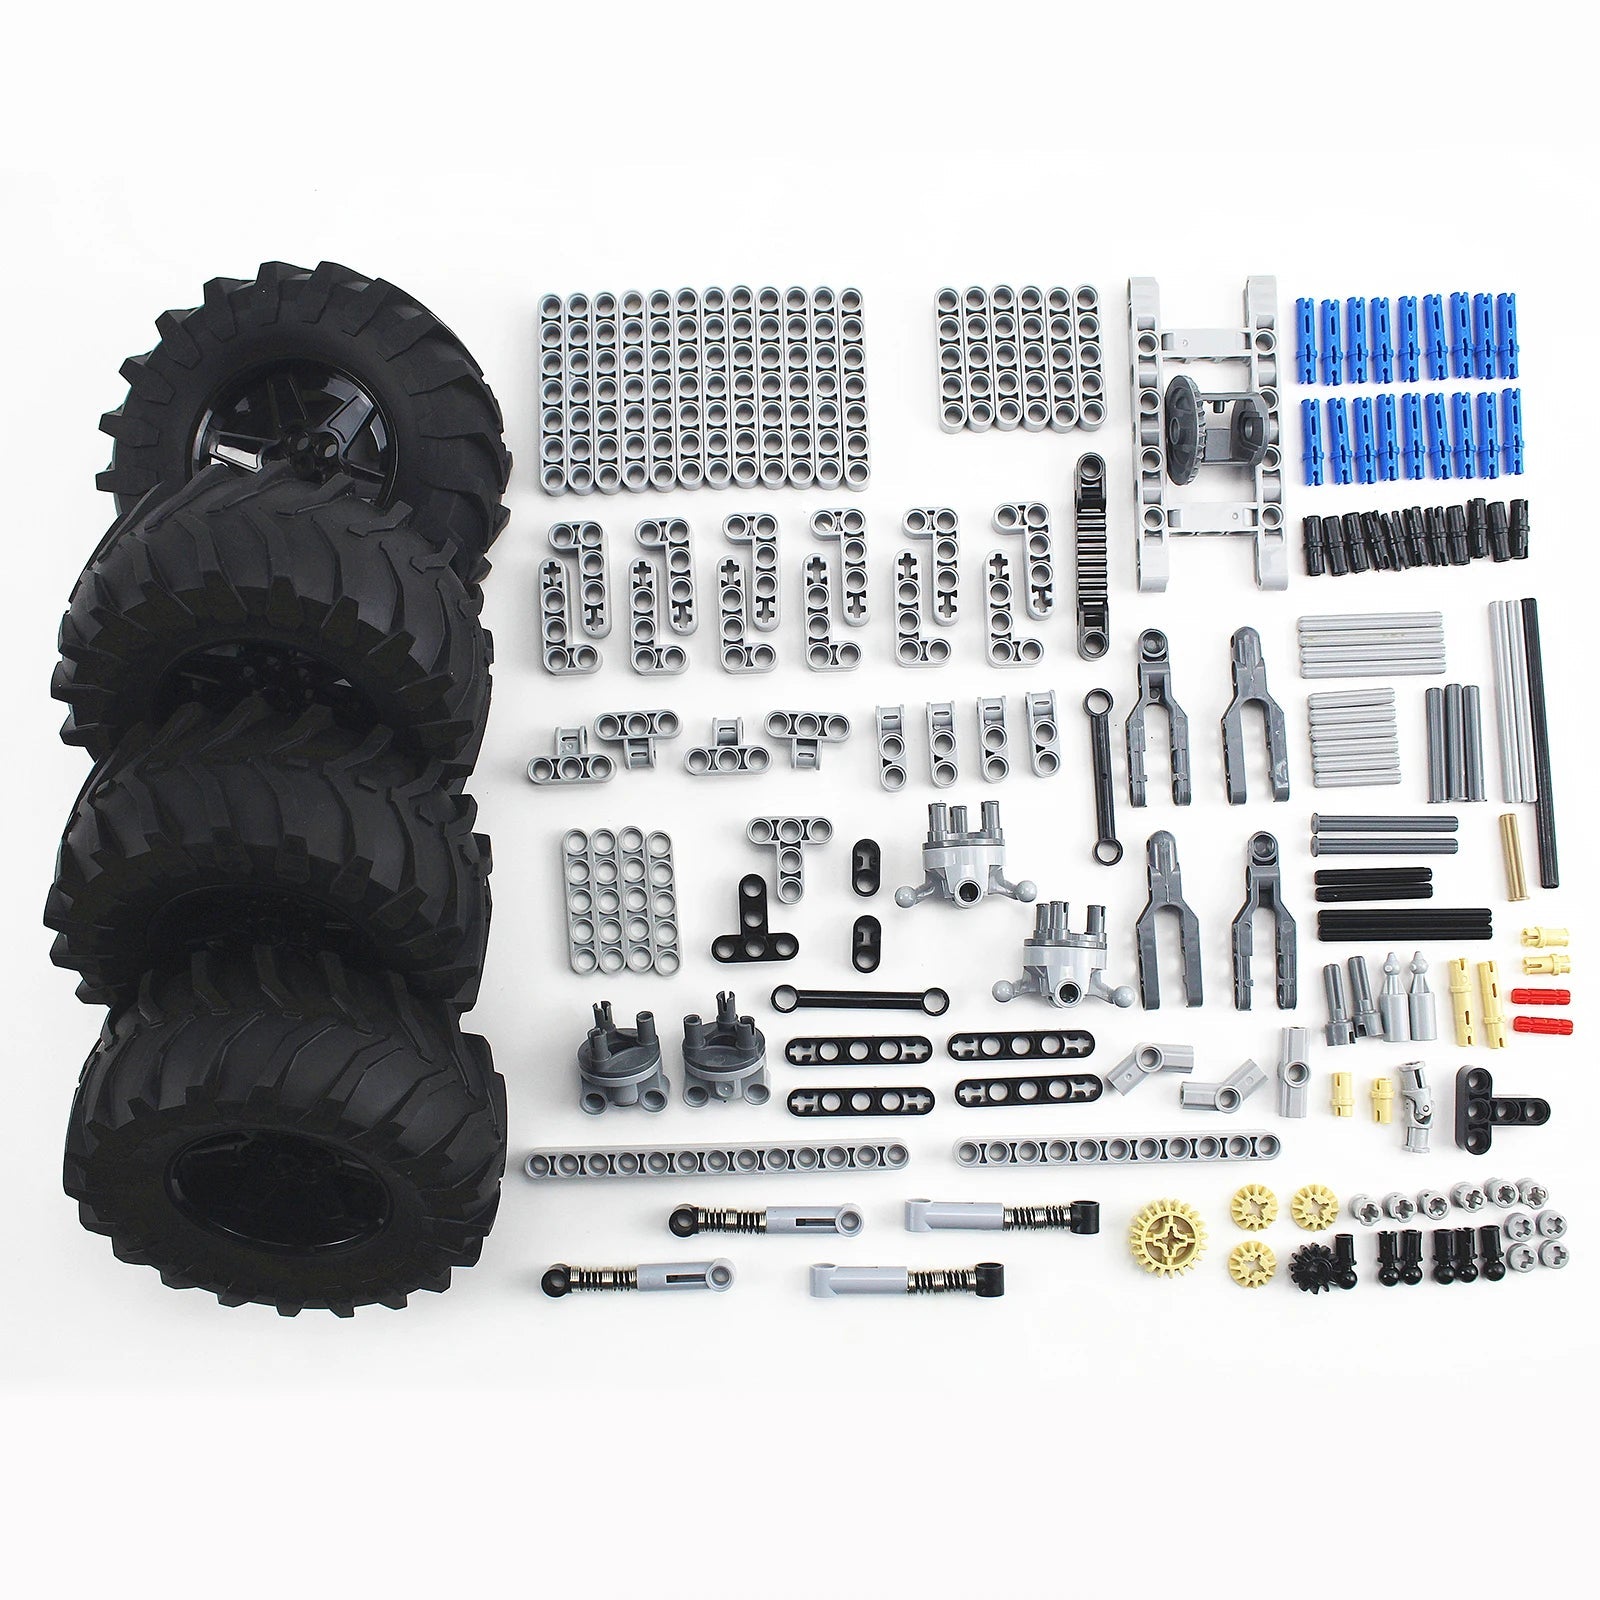 Suspension System and Tires Technical Parts Set for Cars - ToylandEU